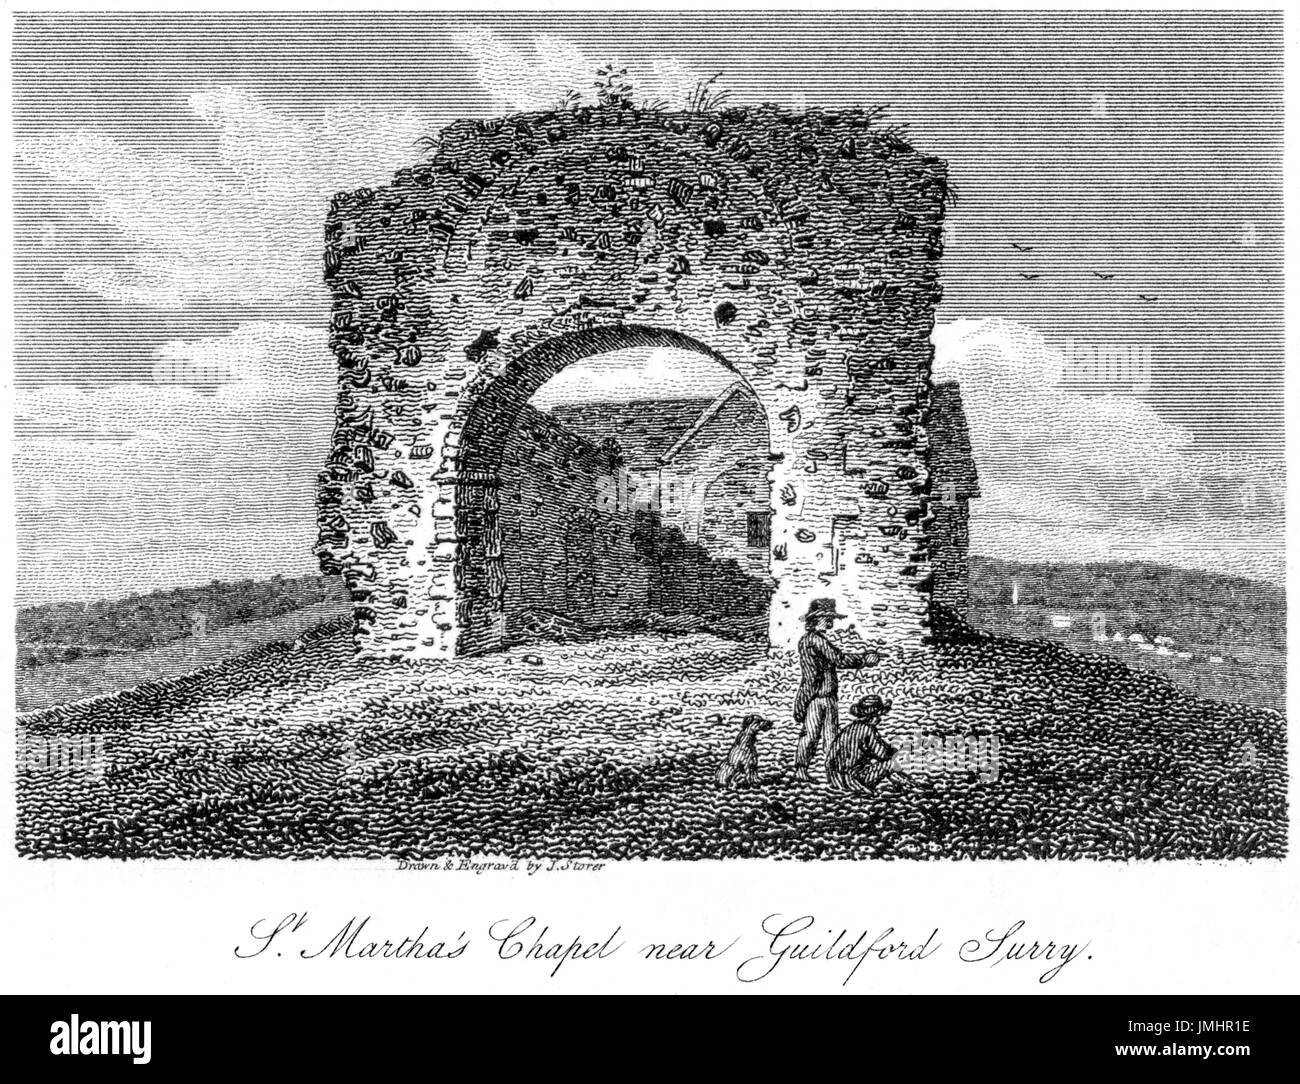 An engraving of St. Martha's Chapel near Guildford, Surry (Surrey) scanned at high resolution from a book printed in 1808.  Believed copyright free. Stock Photo